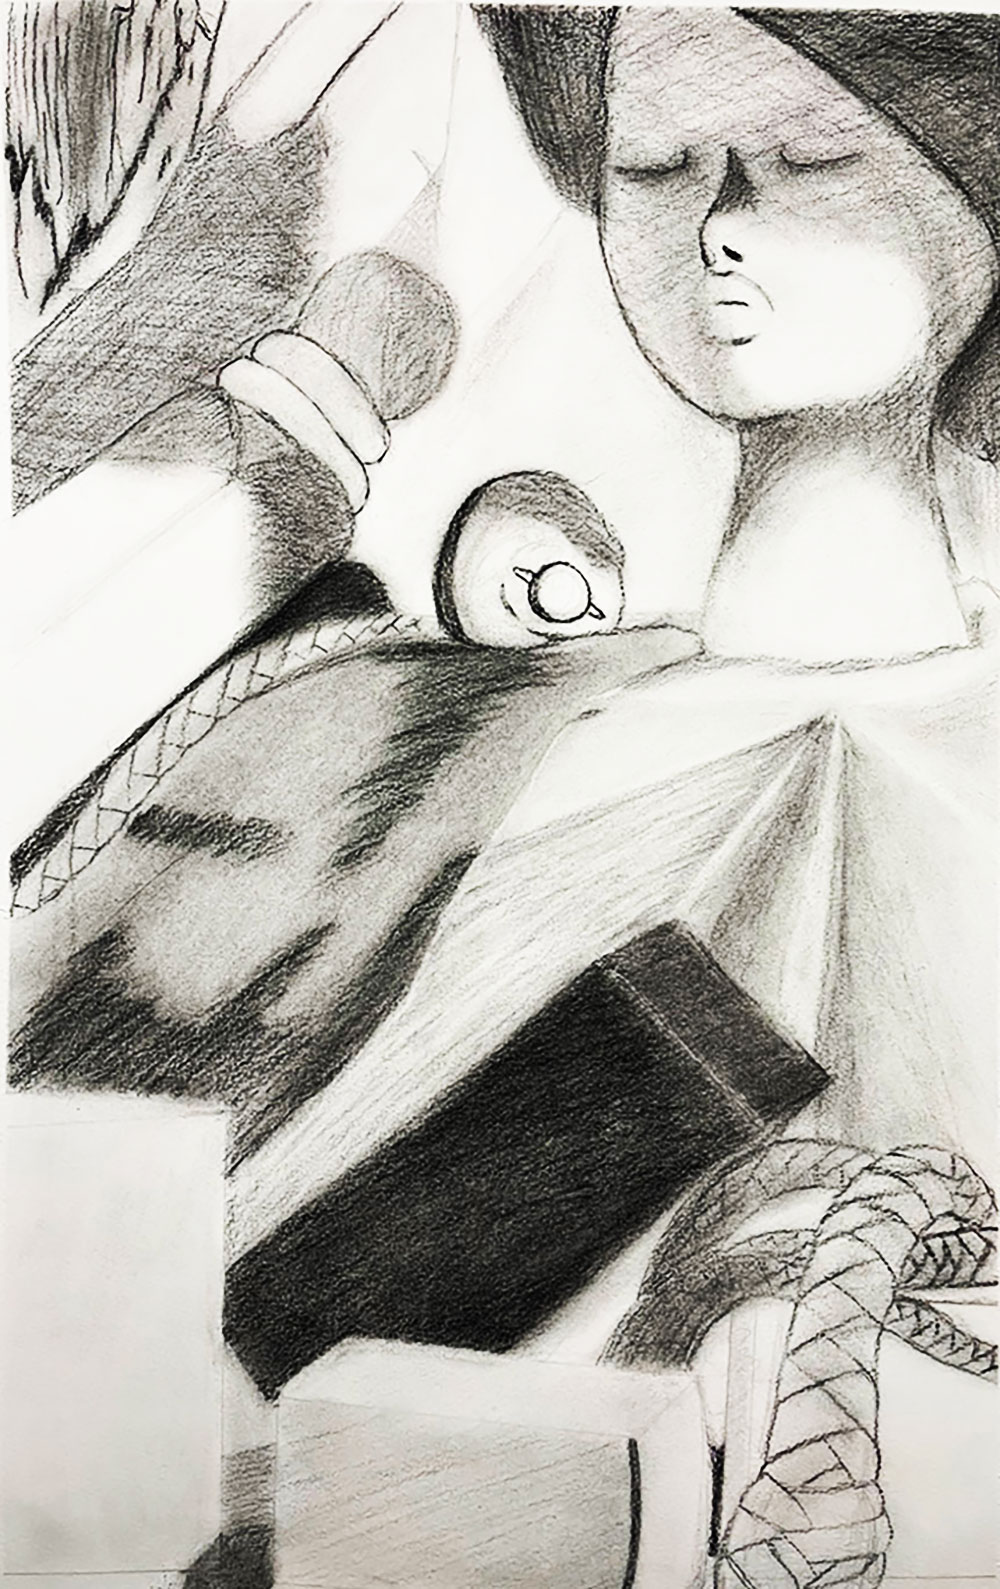 Charcoal drawing of still life includes: a dolls face, rope, and the foot of a stool